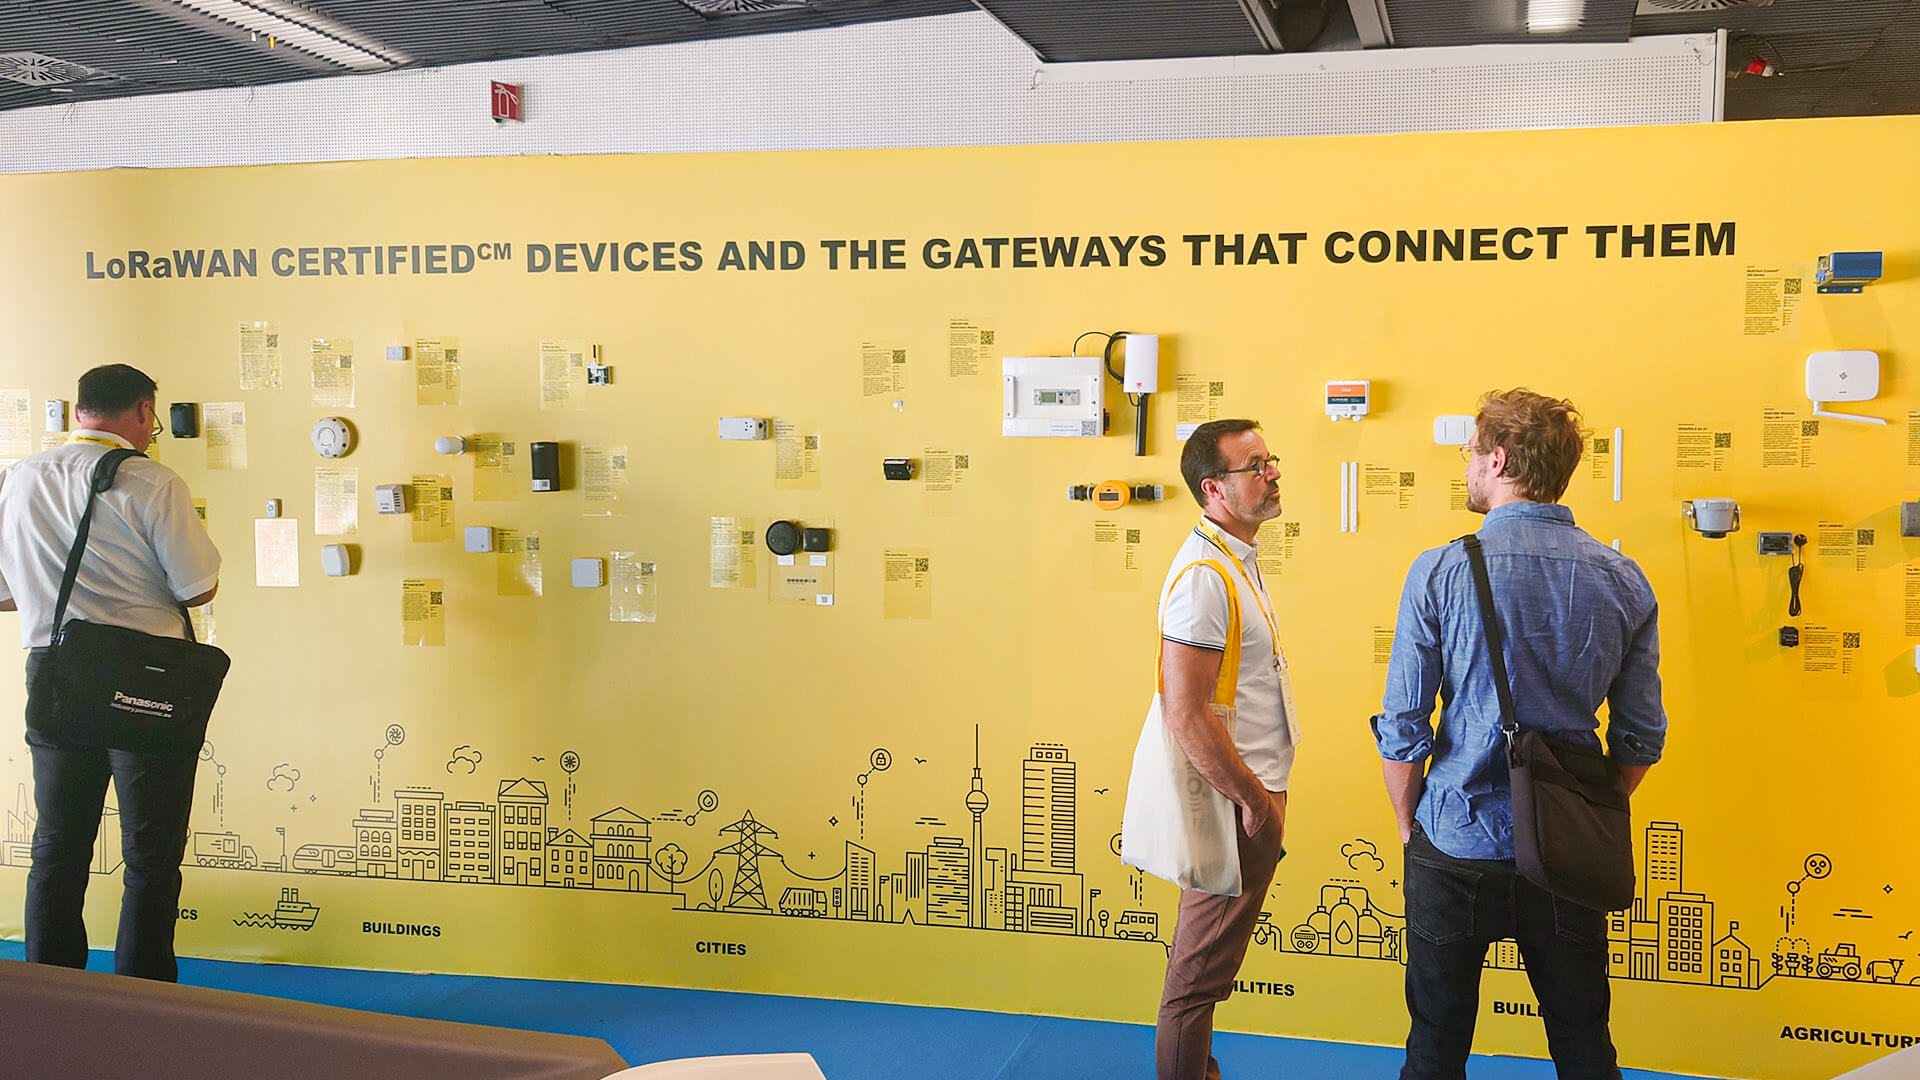 A wide variety of certified LoRaWAN devices and gateways were on display.